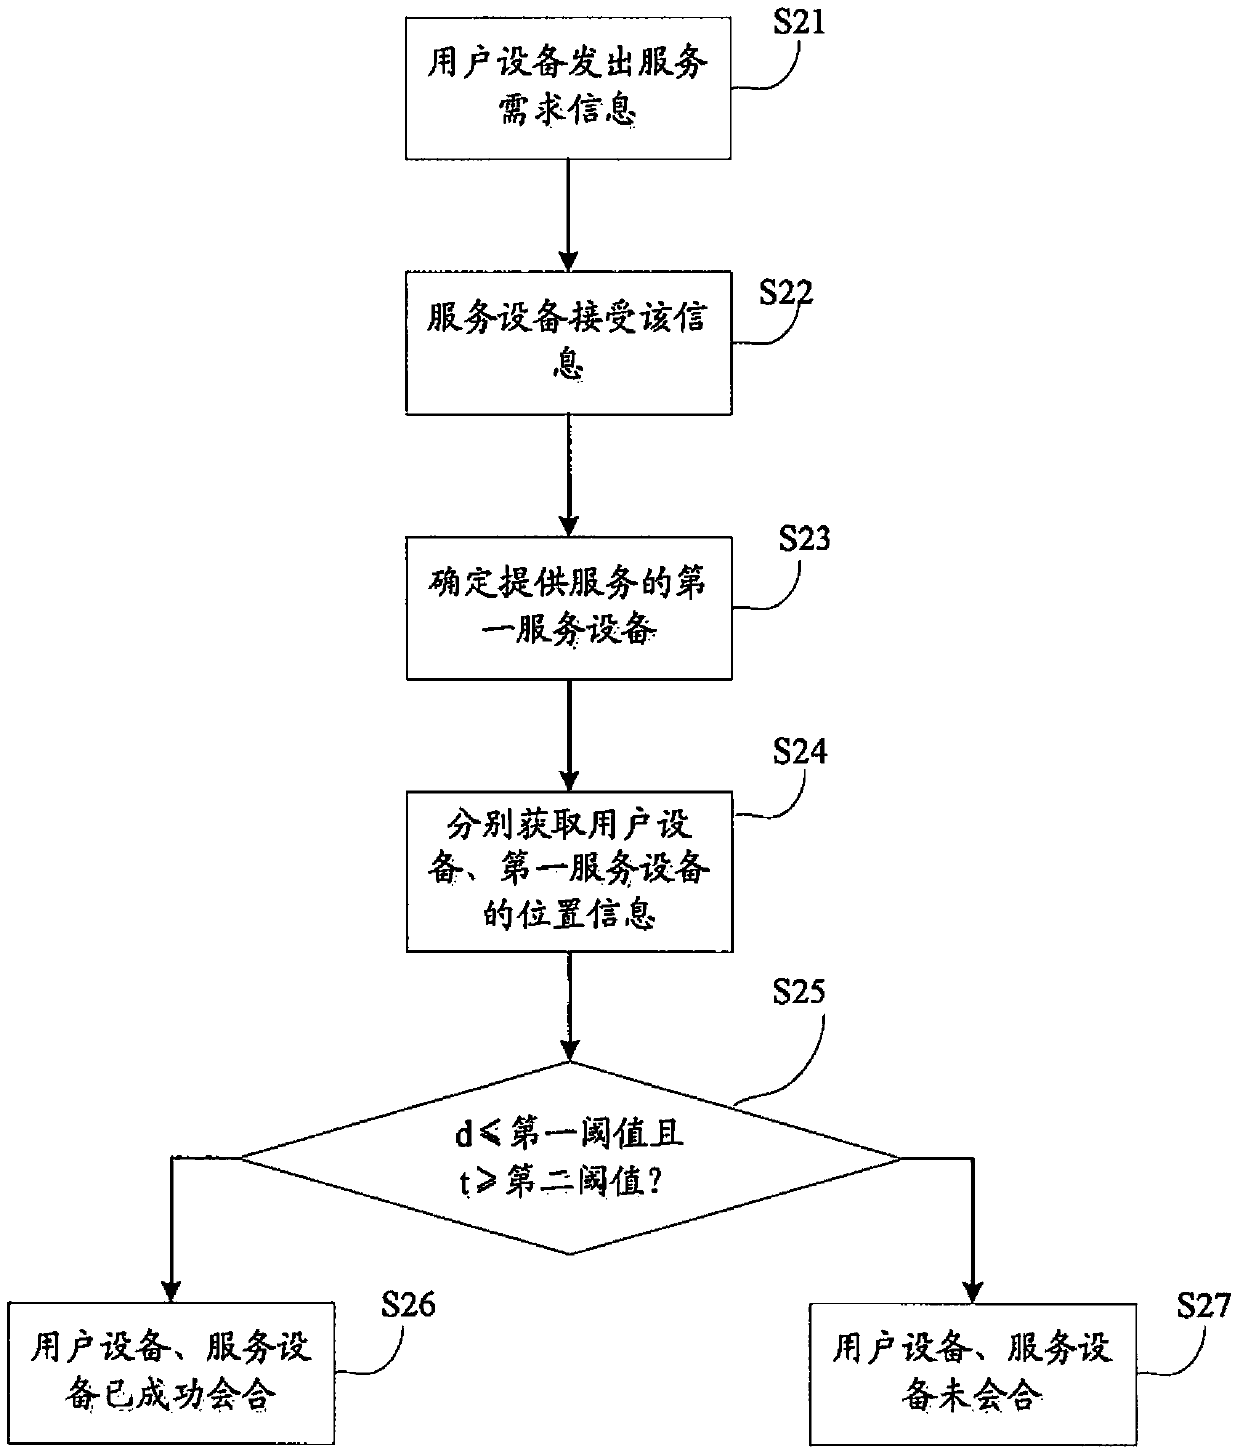 Method and device for identifying whether a passenger successfully hails a taxi